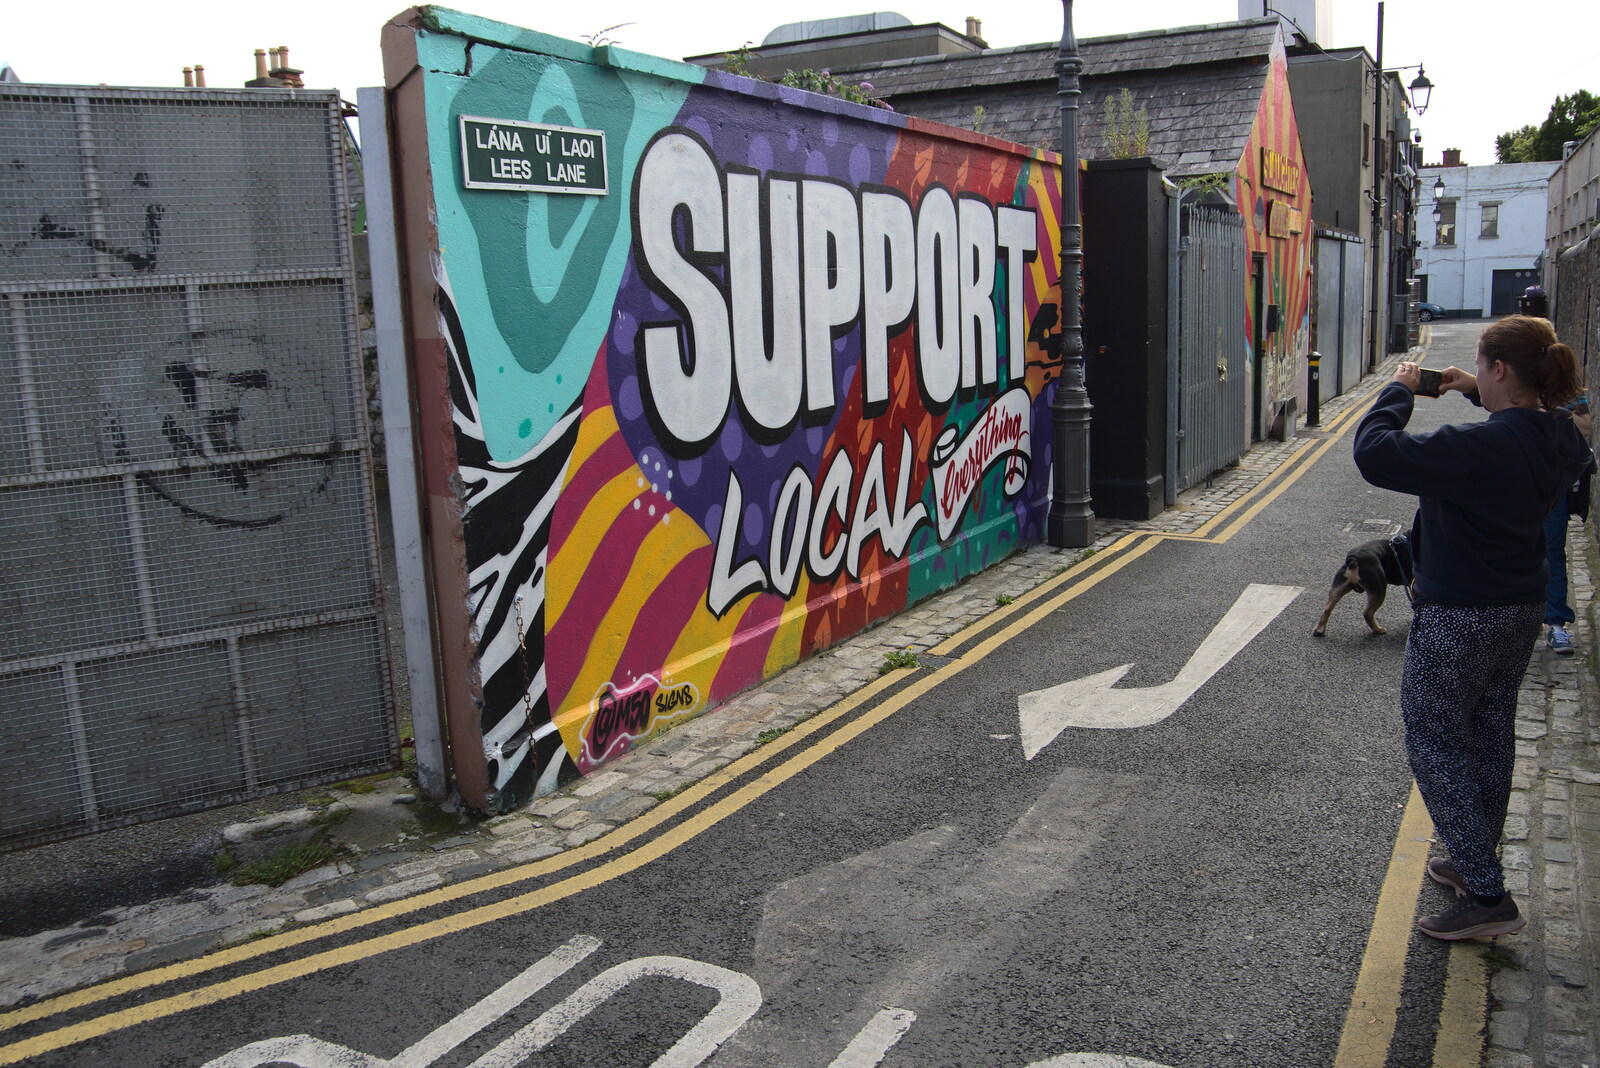 Support Local on Lees Lane from Manorhamilton and the Street Art of Dún Laoghaire, Ireland - 15th August 2021